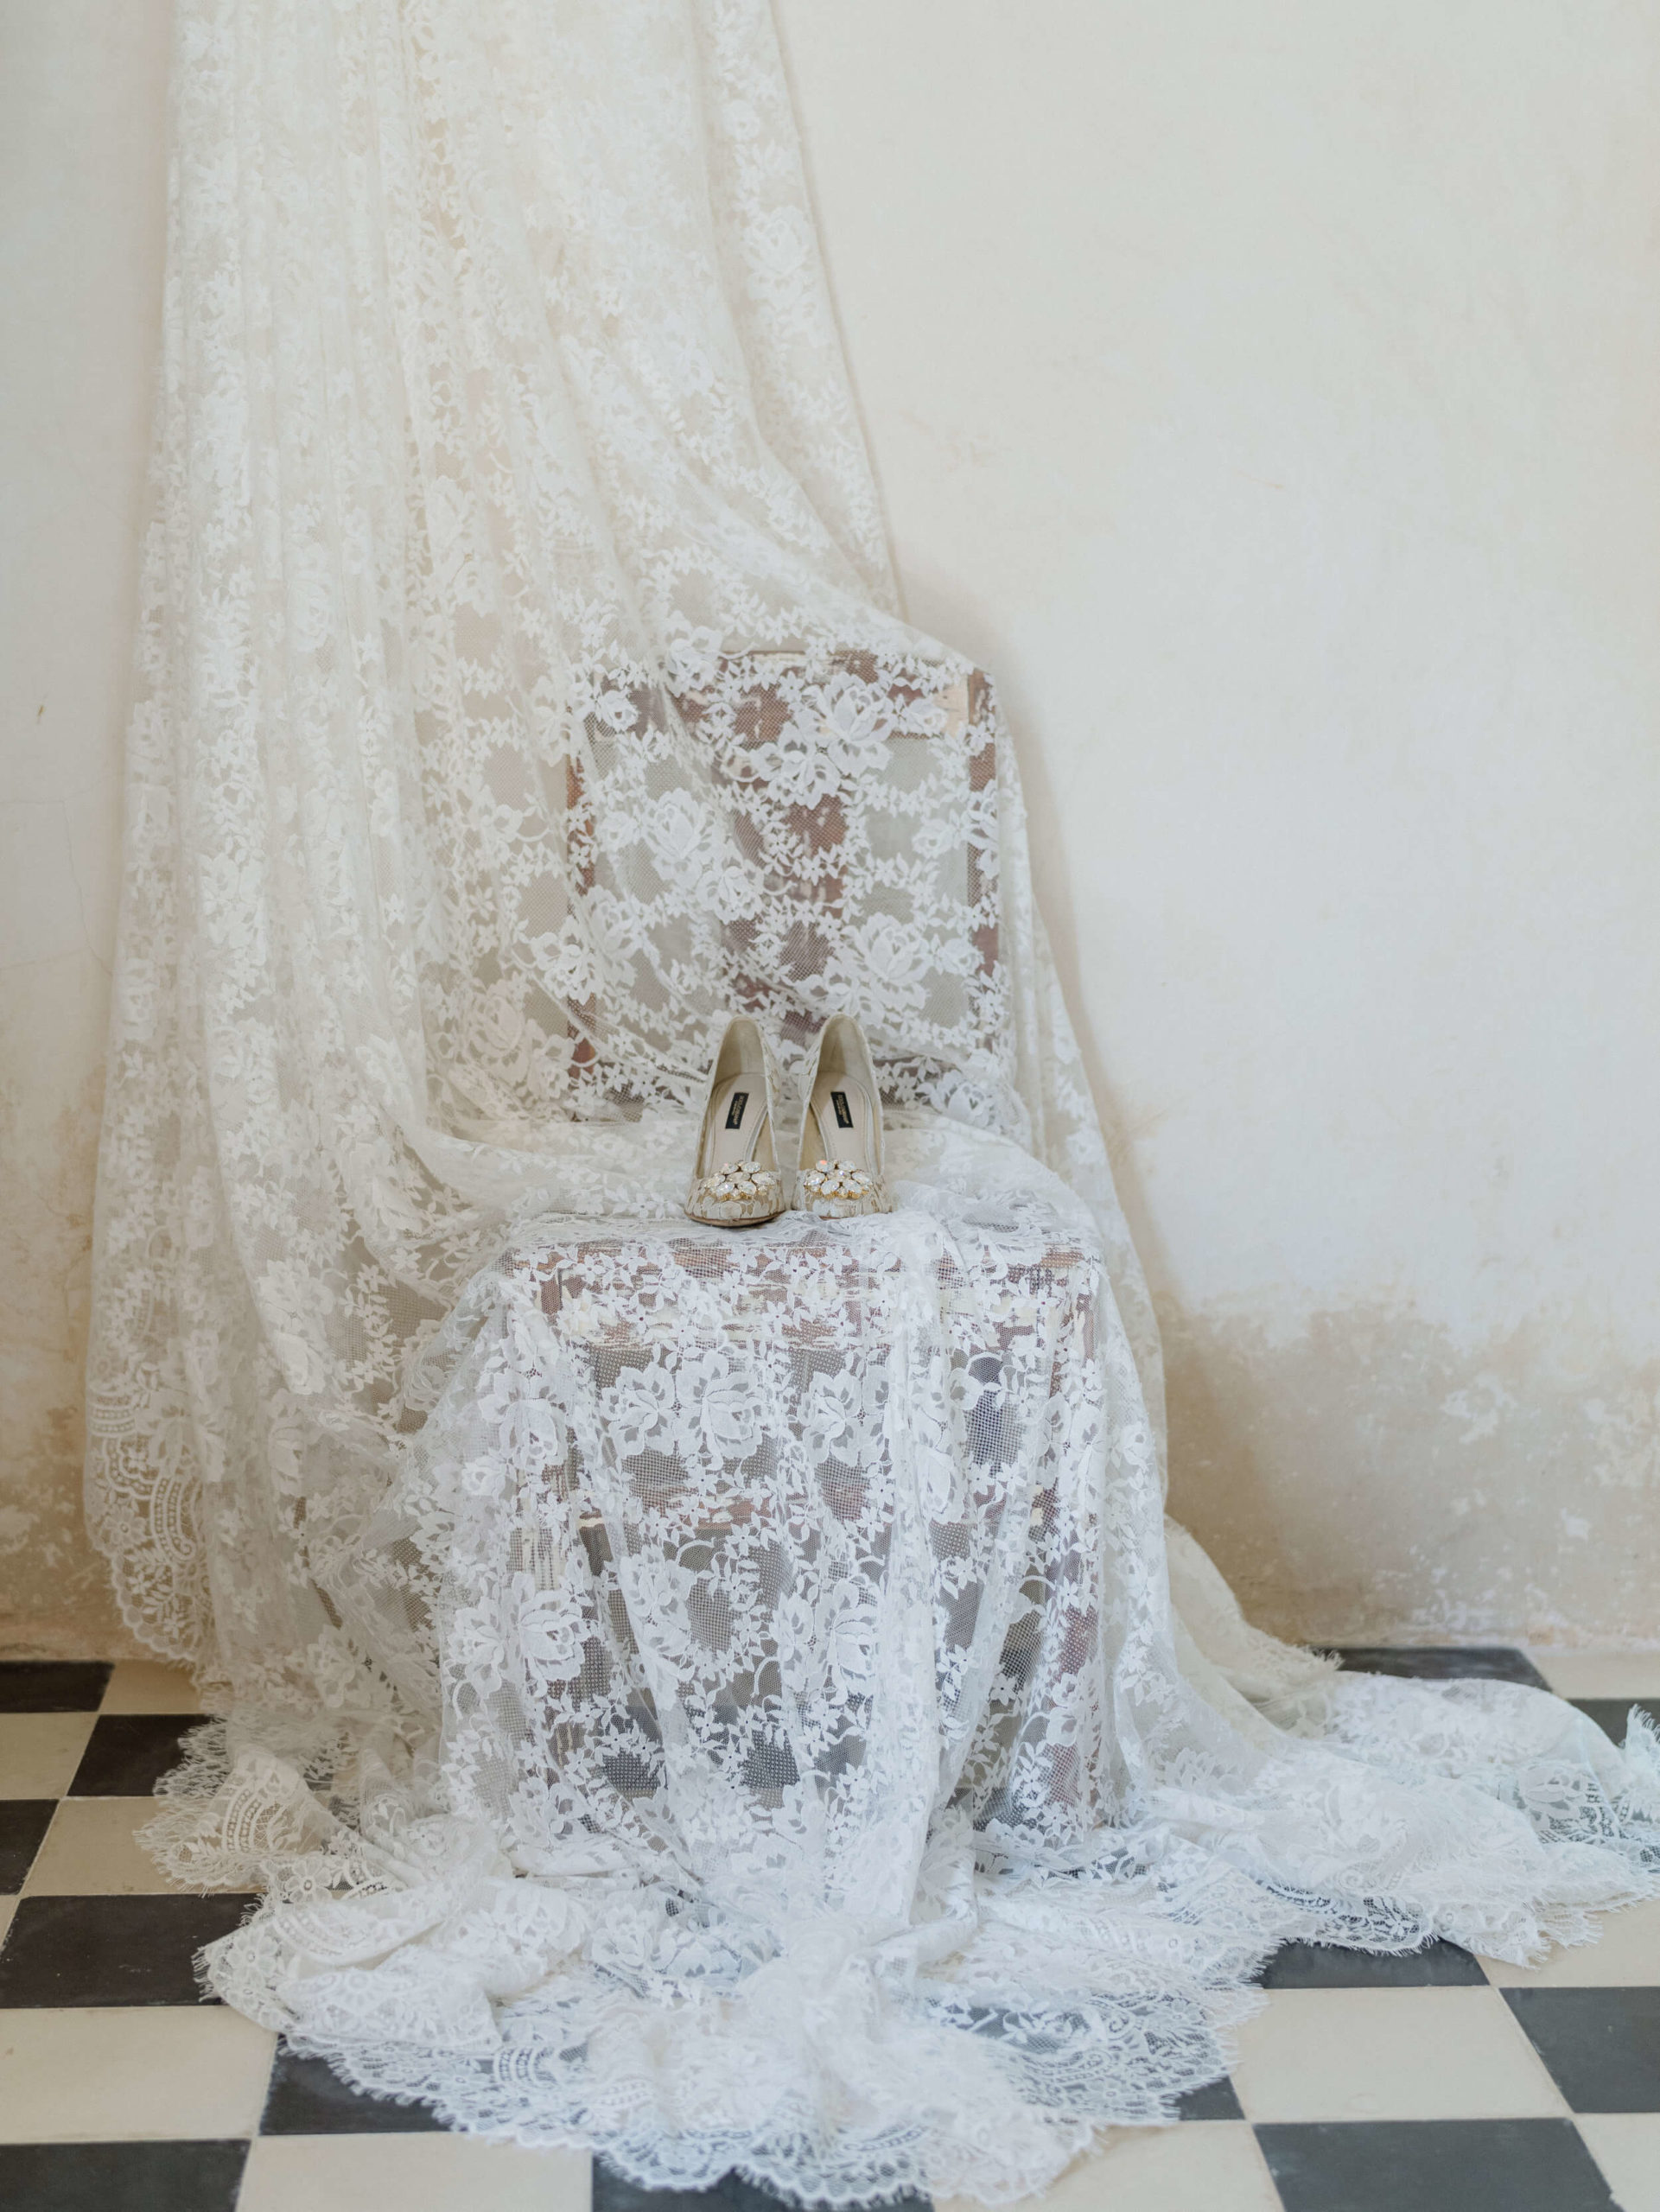 Bride's shoes on a chair draped in lace